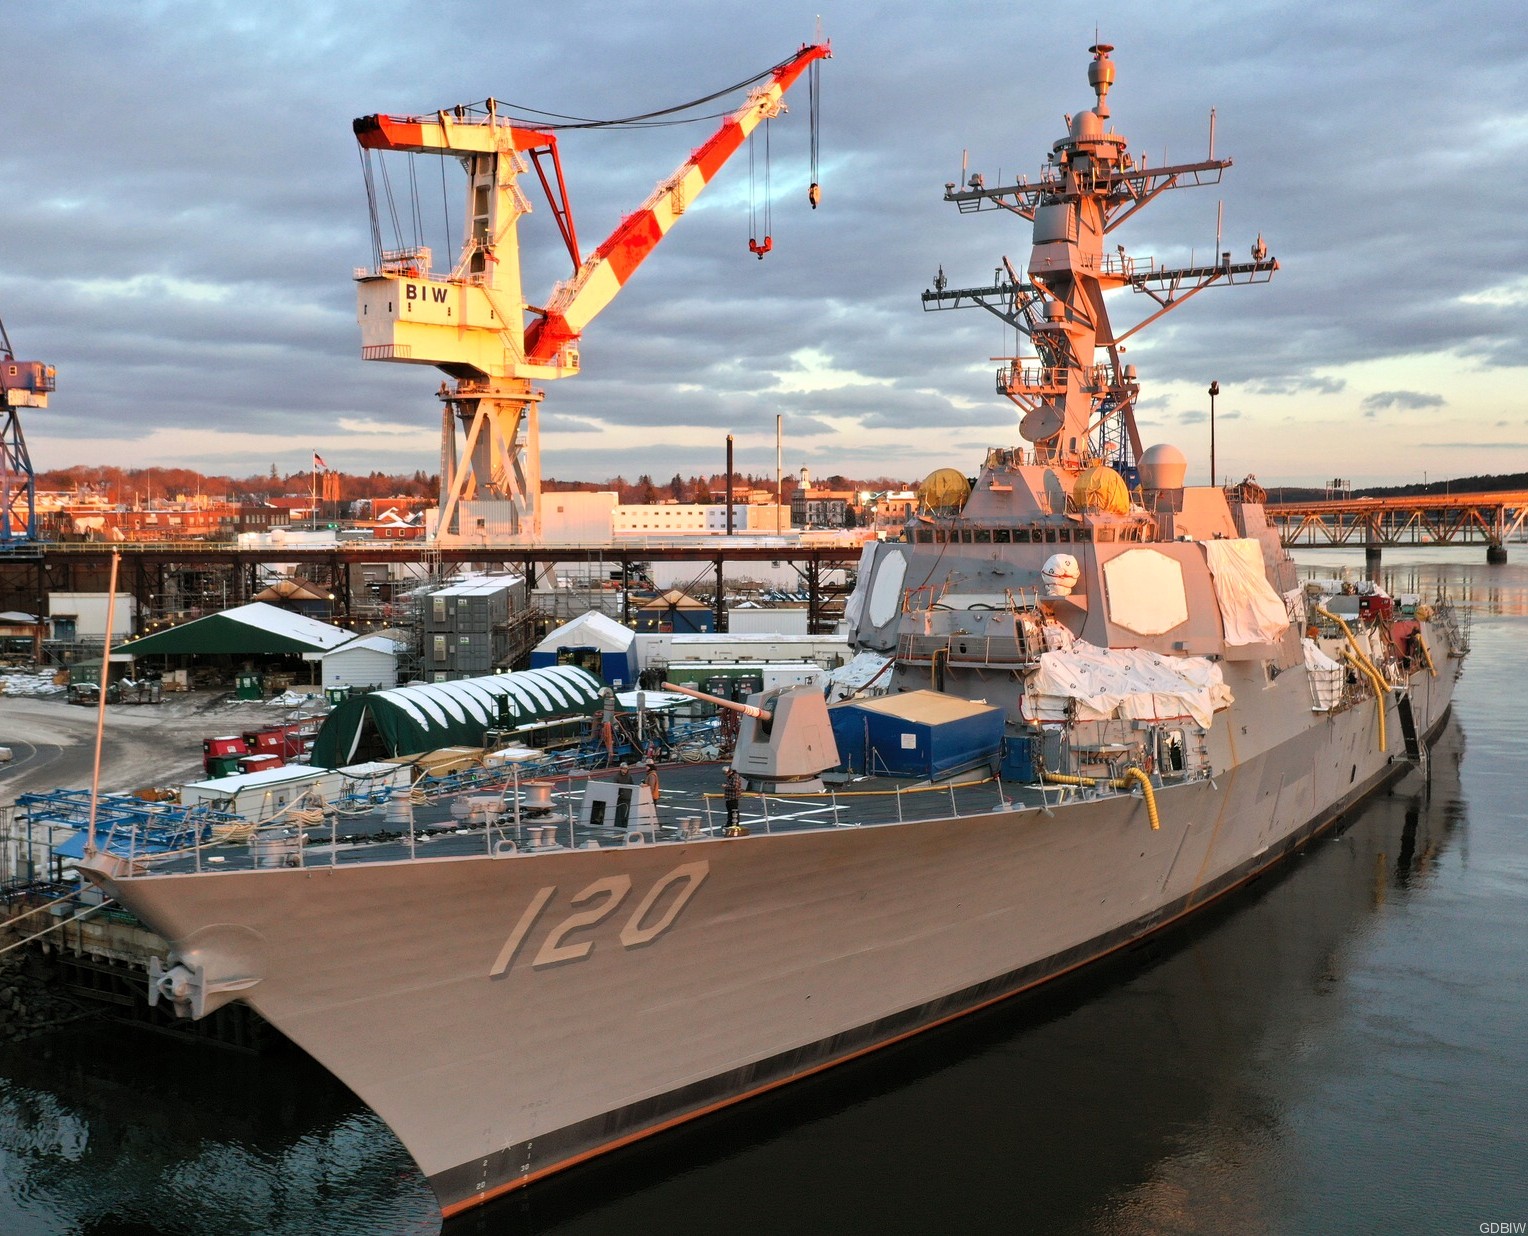 ddg-120 uss carl m. levin arleigh burke class guided missile destroyer aegis us navy 36